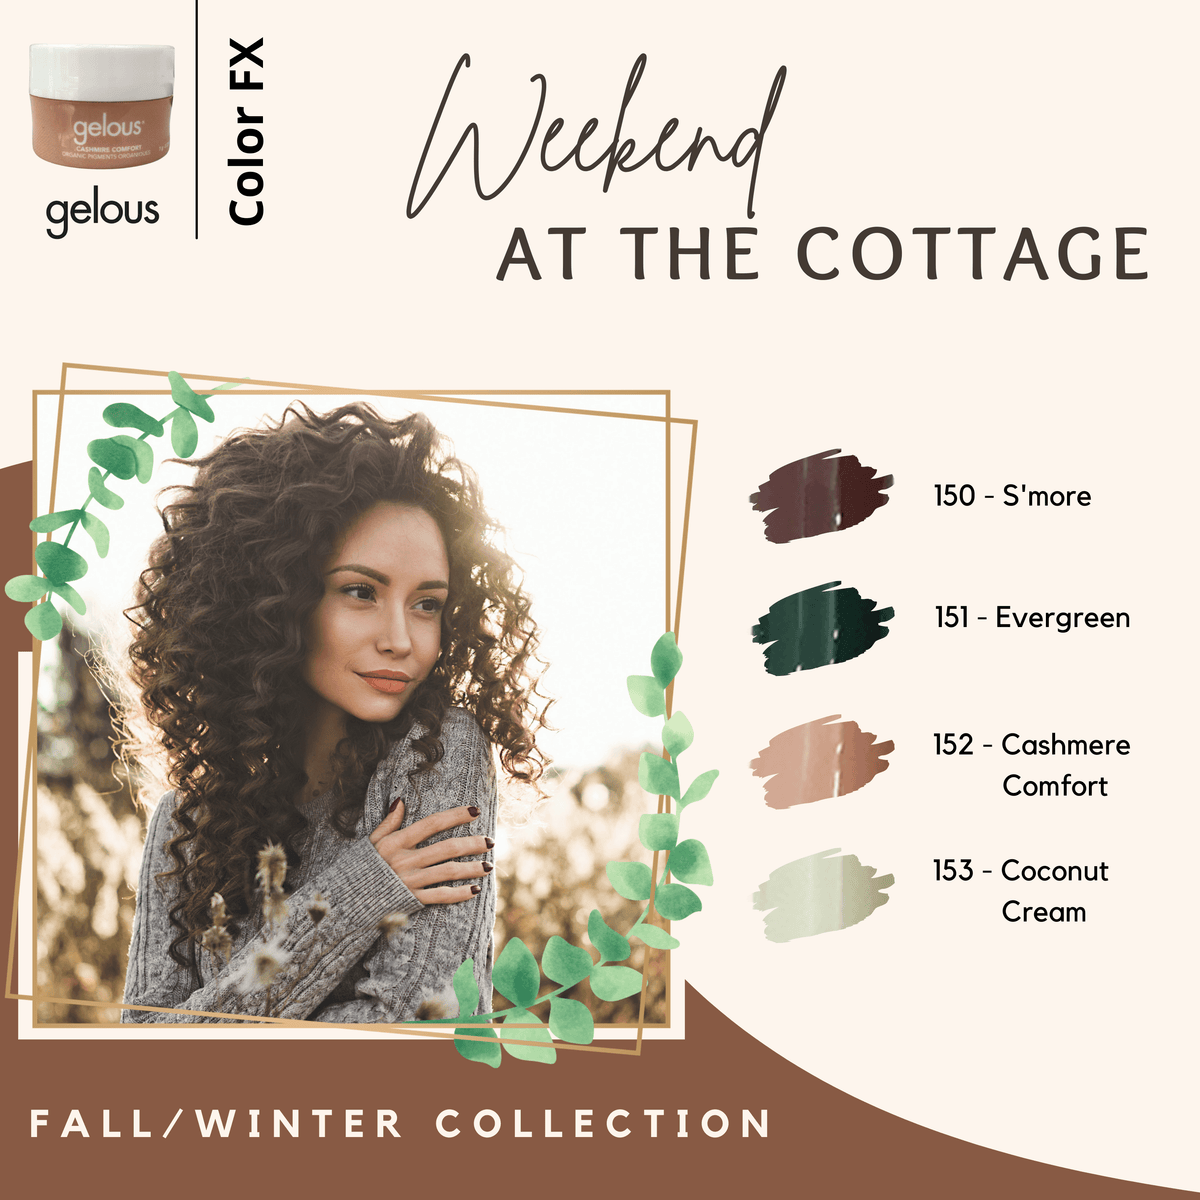 GELOUS COLOR FX FALL/WINTER COLLECTION 2021 - WEEKEND AT THE COTTAGE - Fanair Cosmetiques